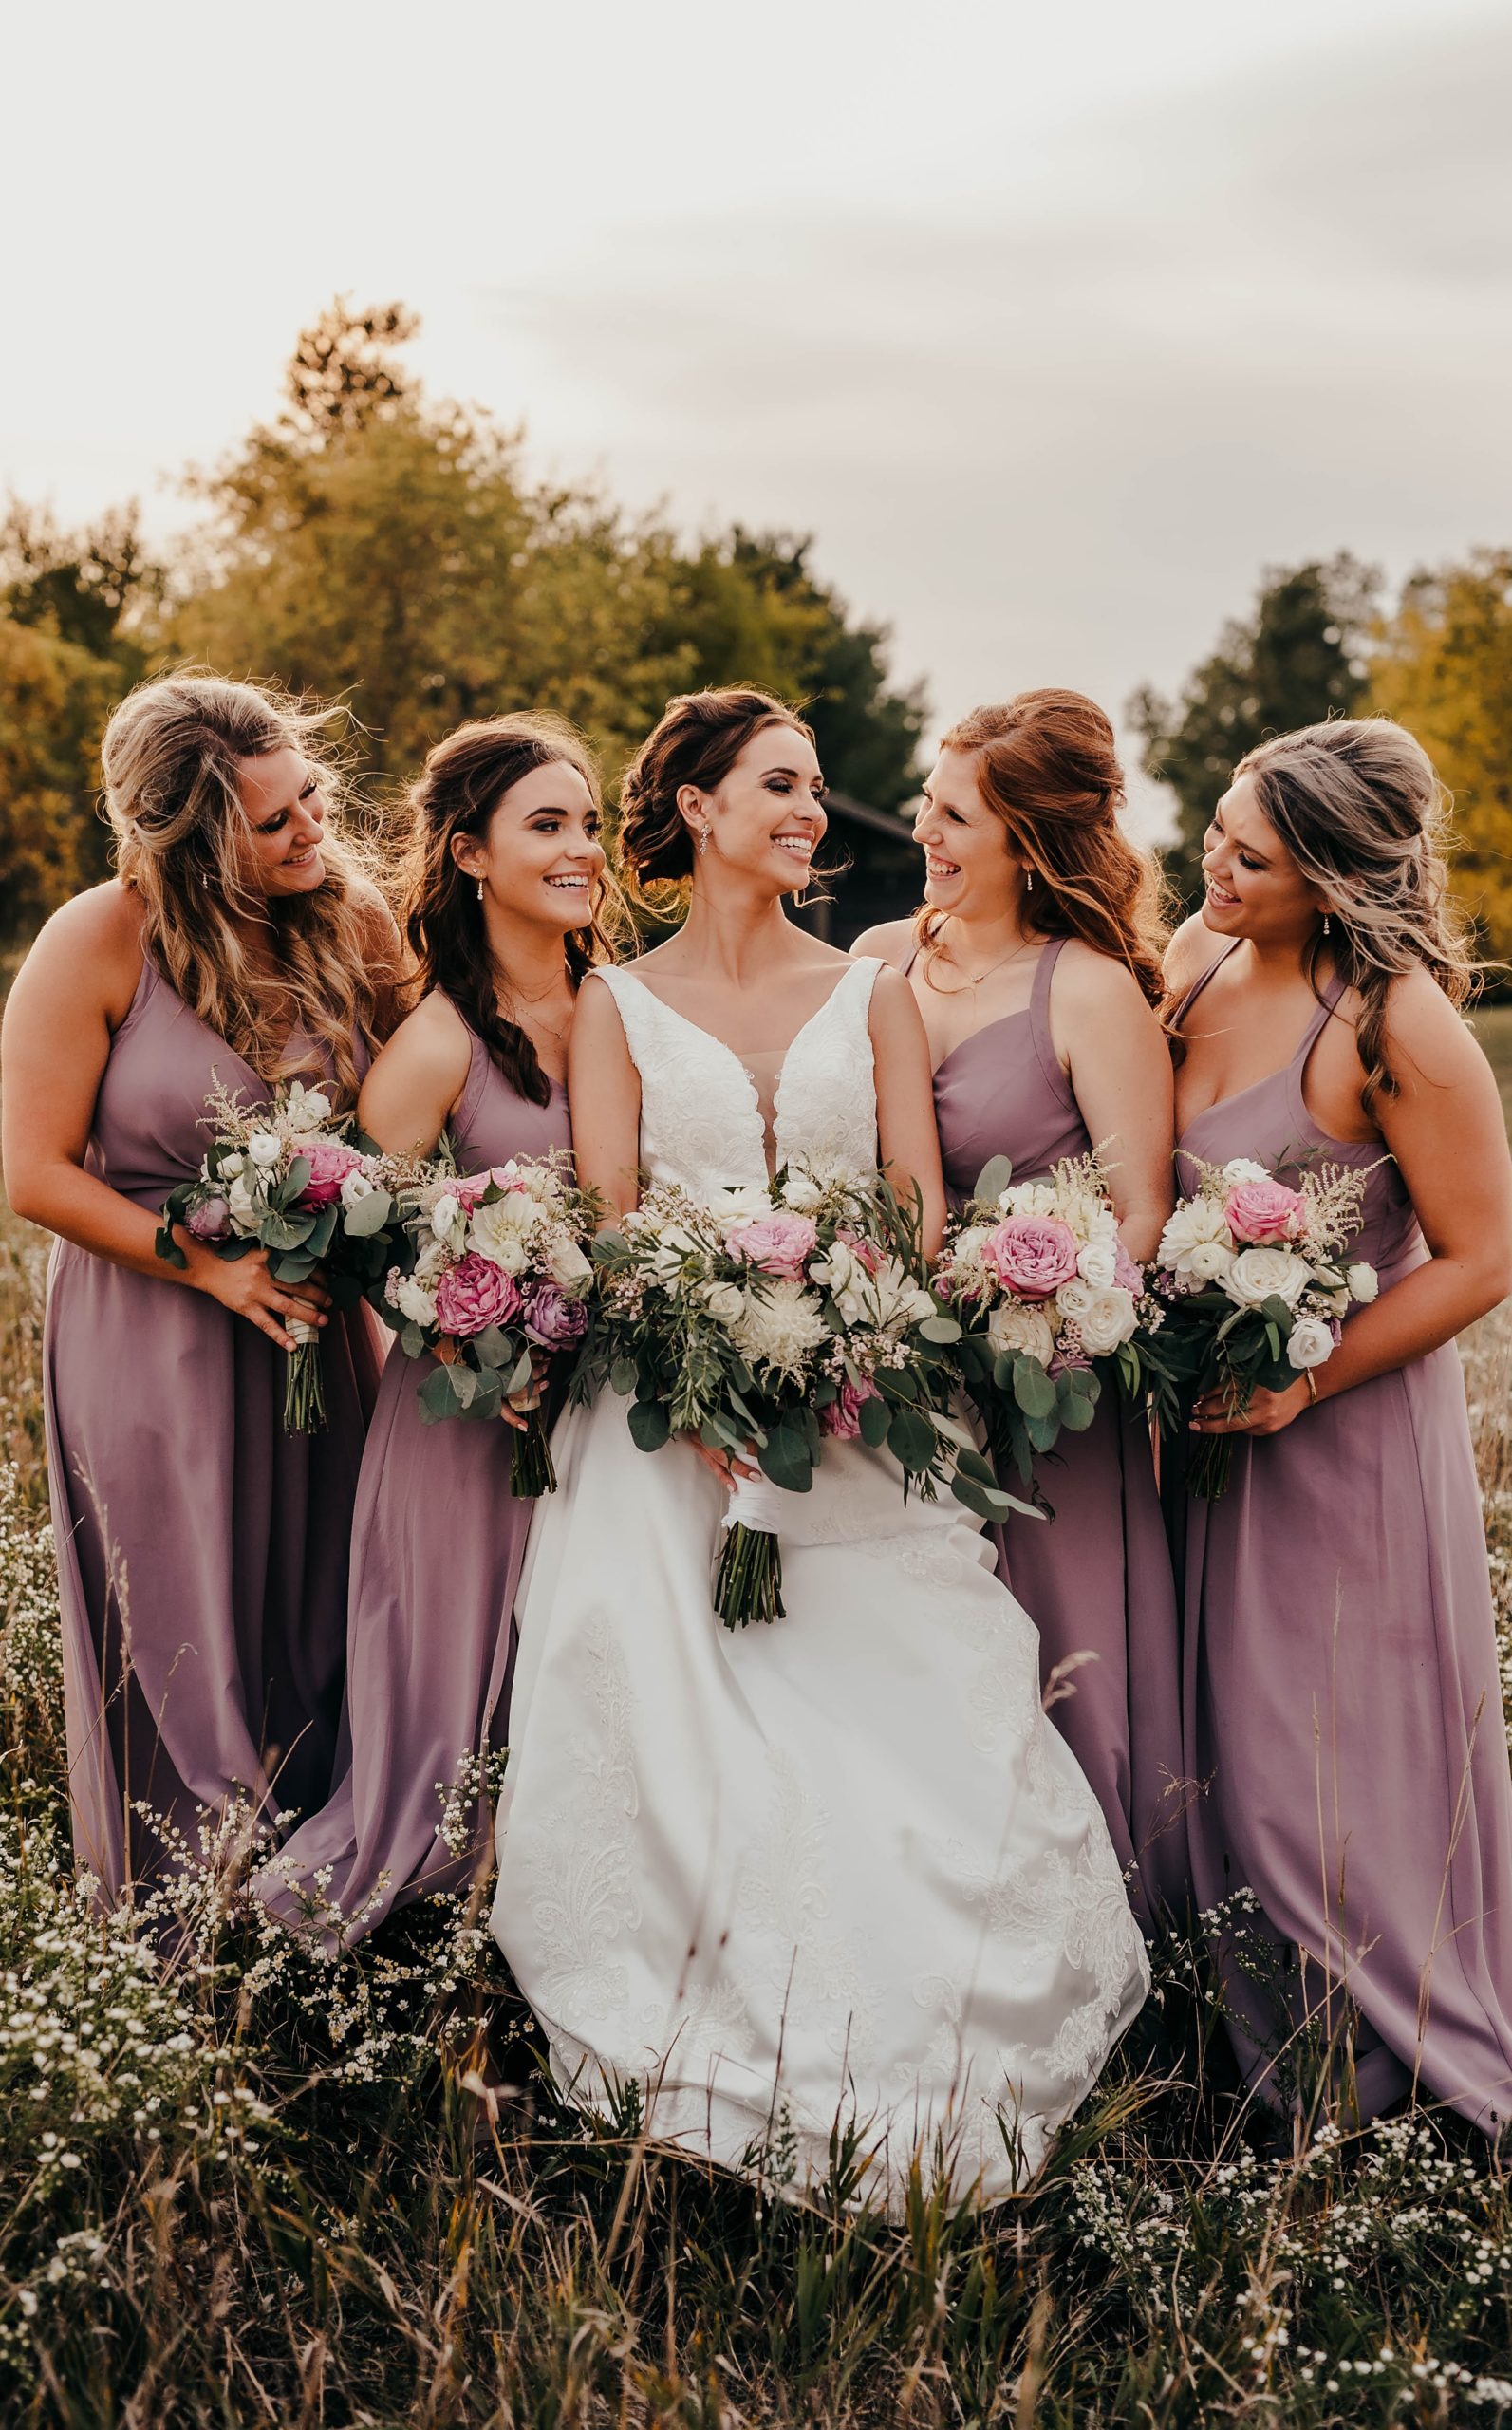 bride and bridesmaids in mauve pose together in field looking at bride